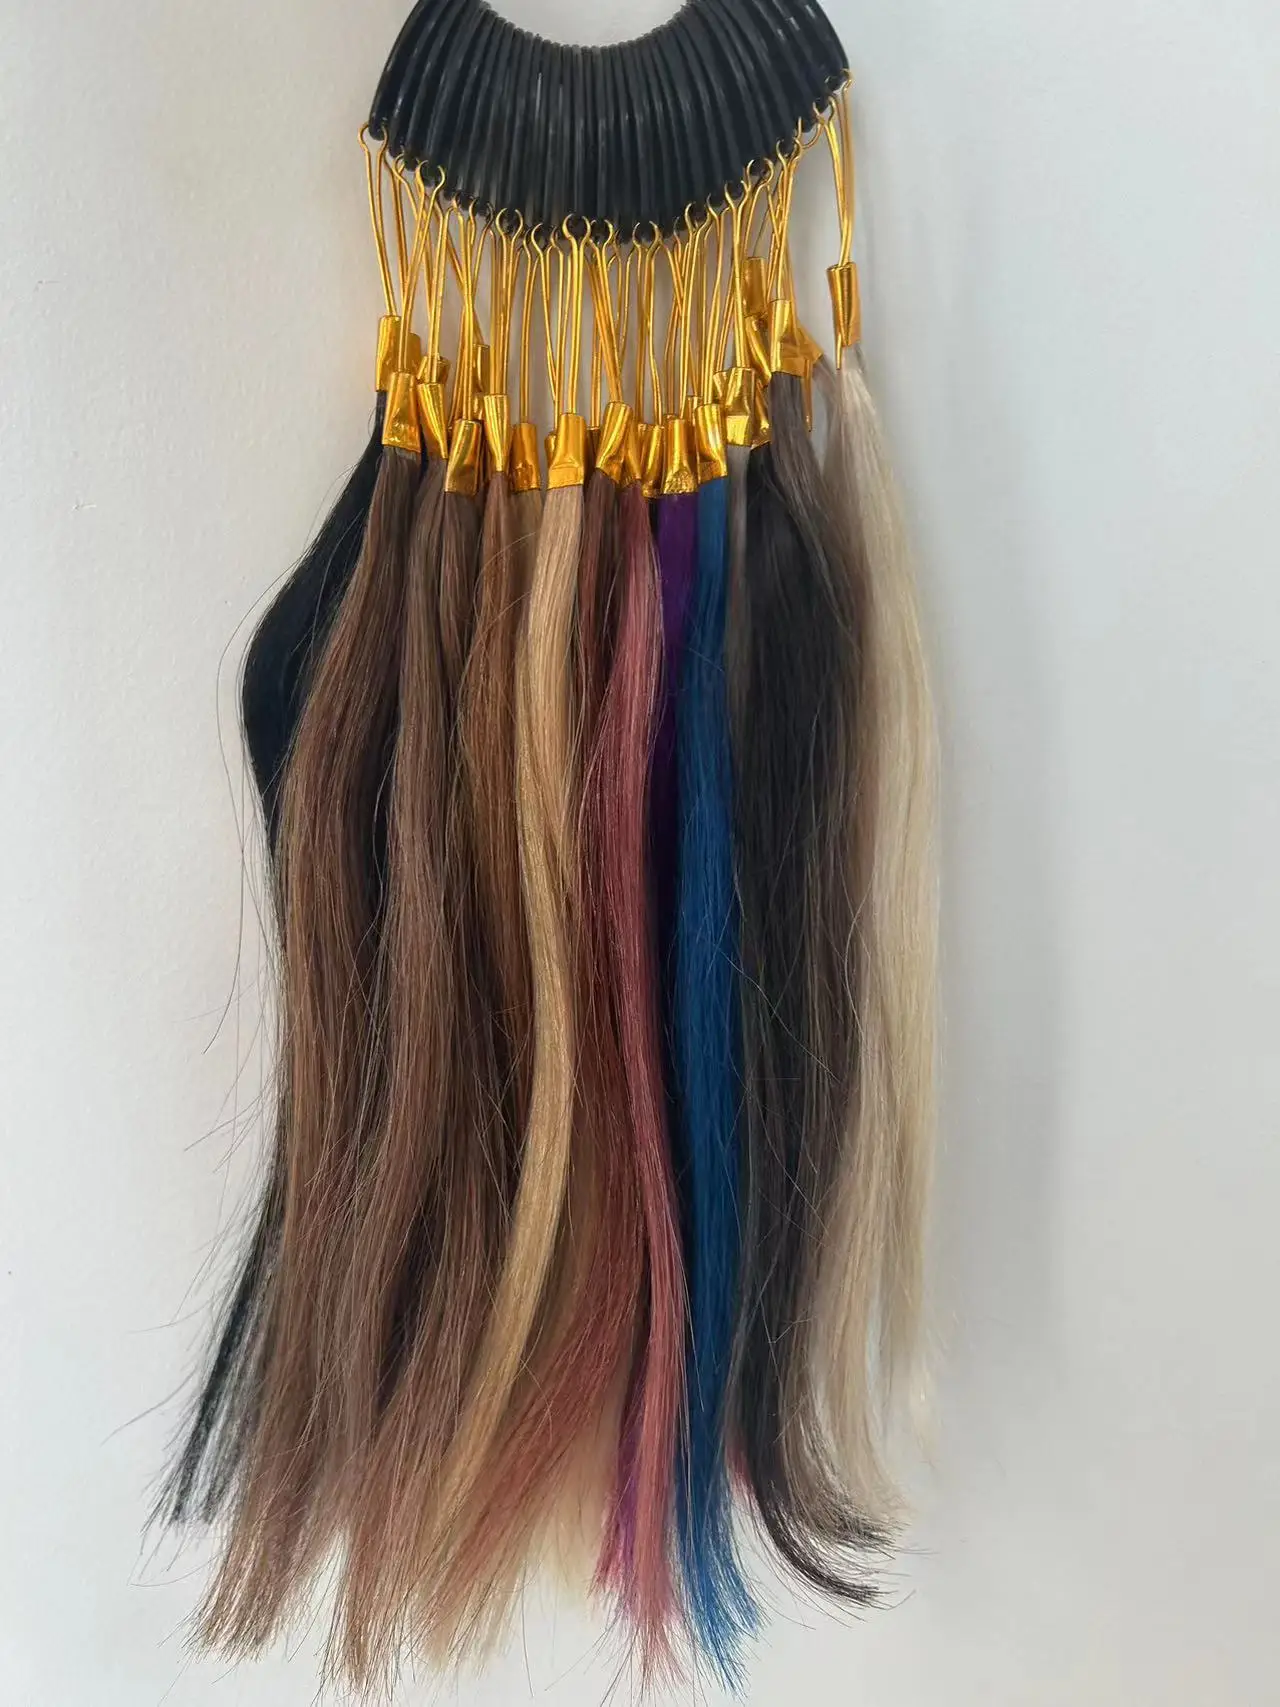 pladio-color-rings-28-color-available-real-nautral-human-hair-for-salon-color-charts-with-hair-swatches-testing